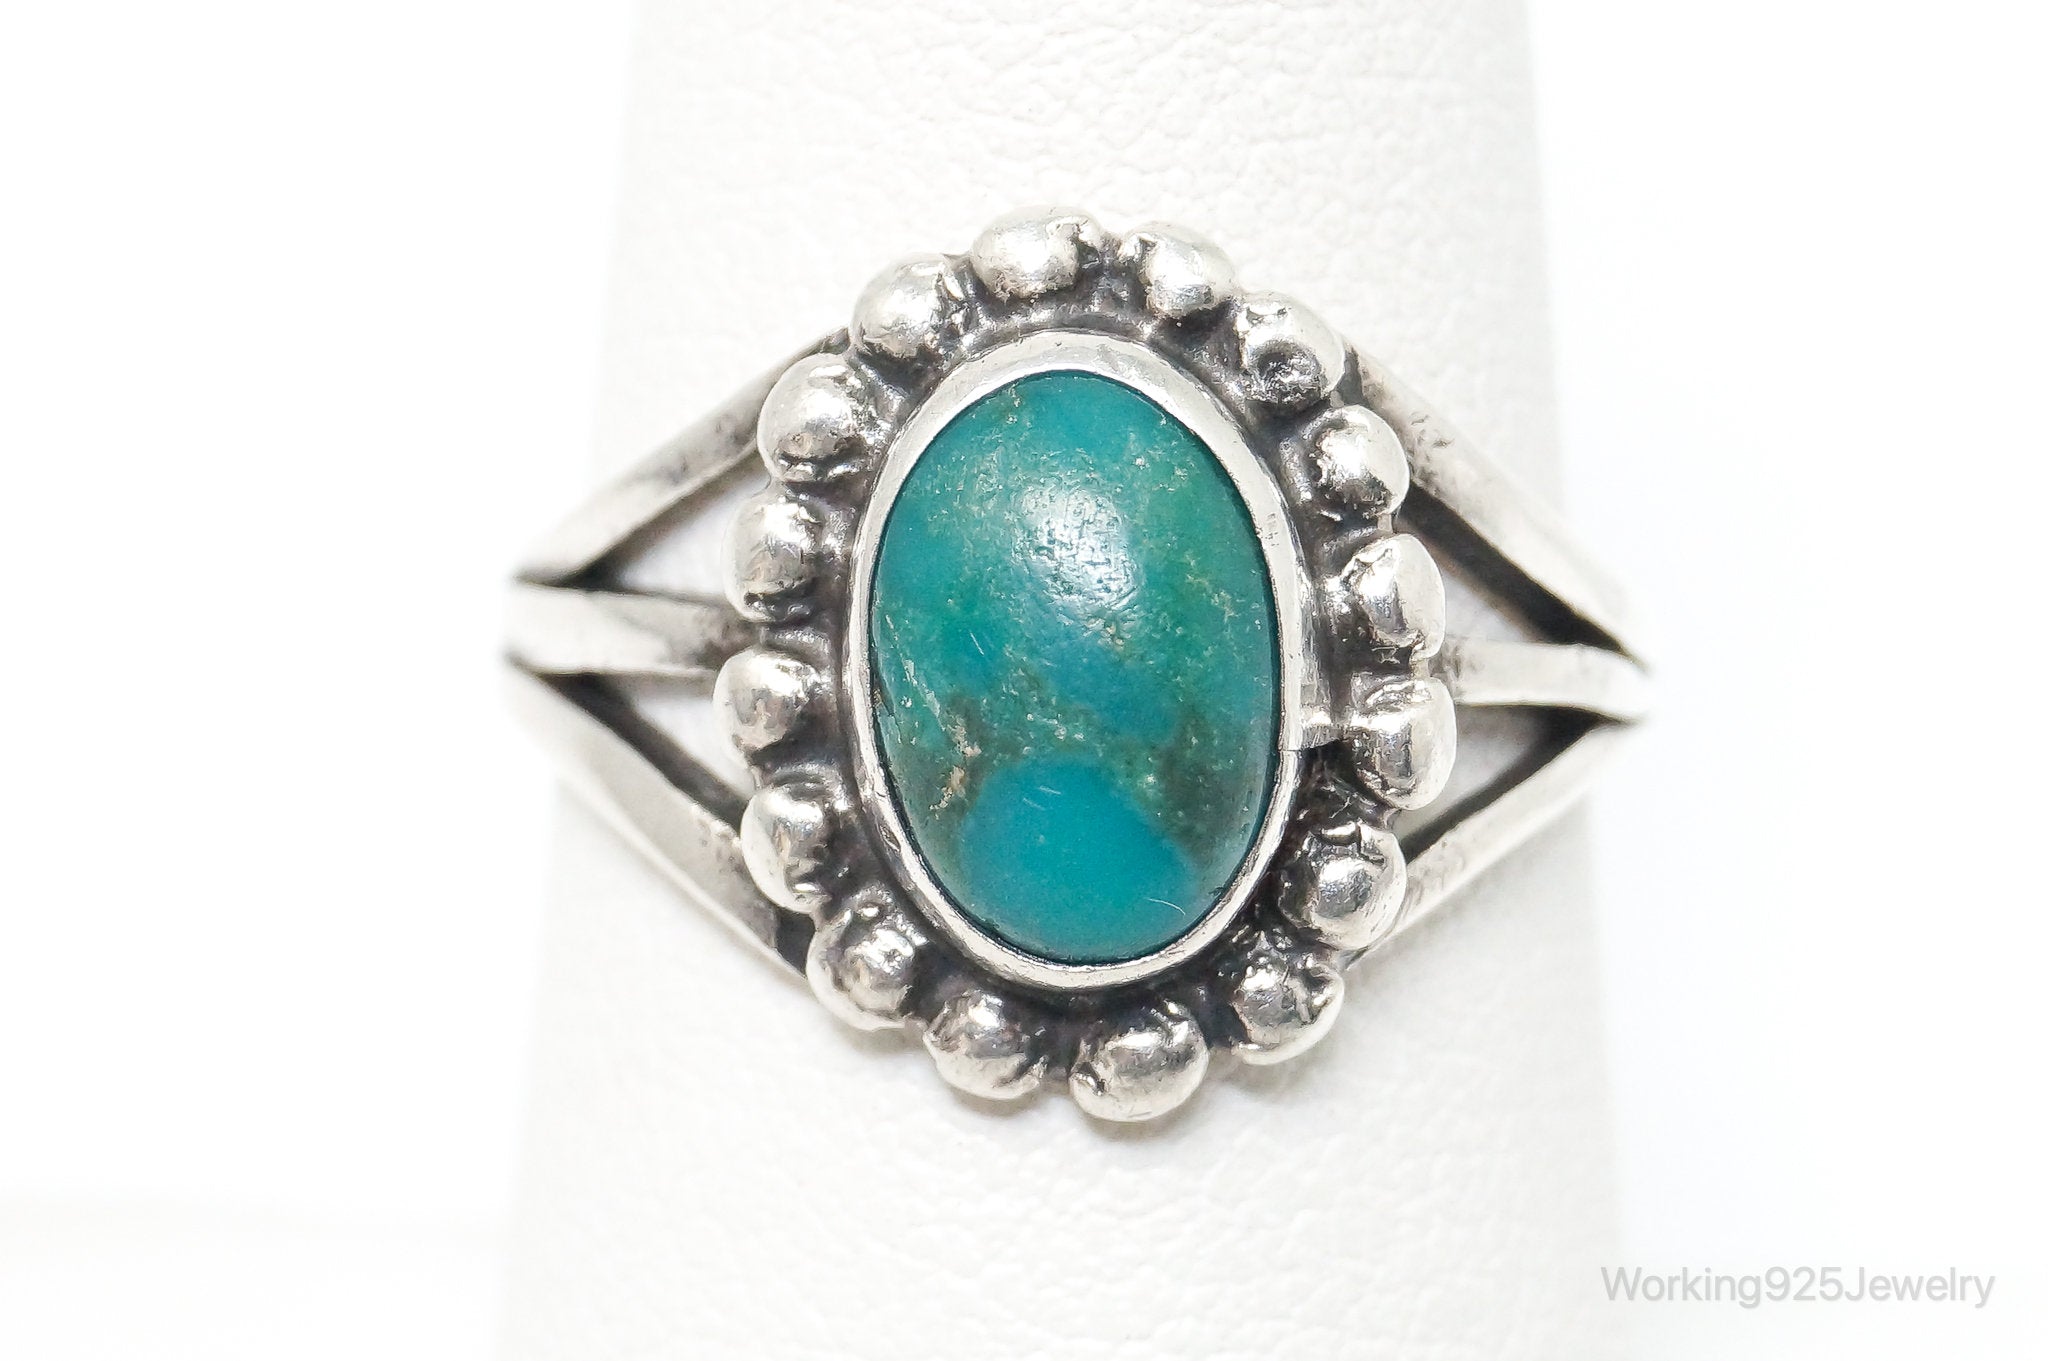 VTG Native American Turquoise Unsigned Sterling Silver Ring SZ 6.5